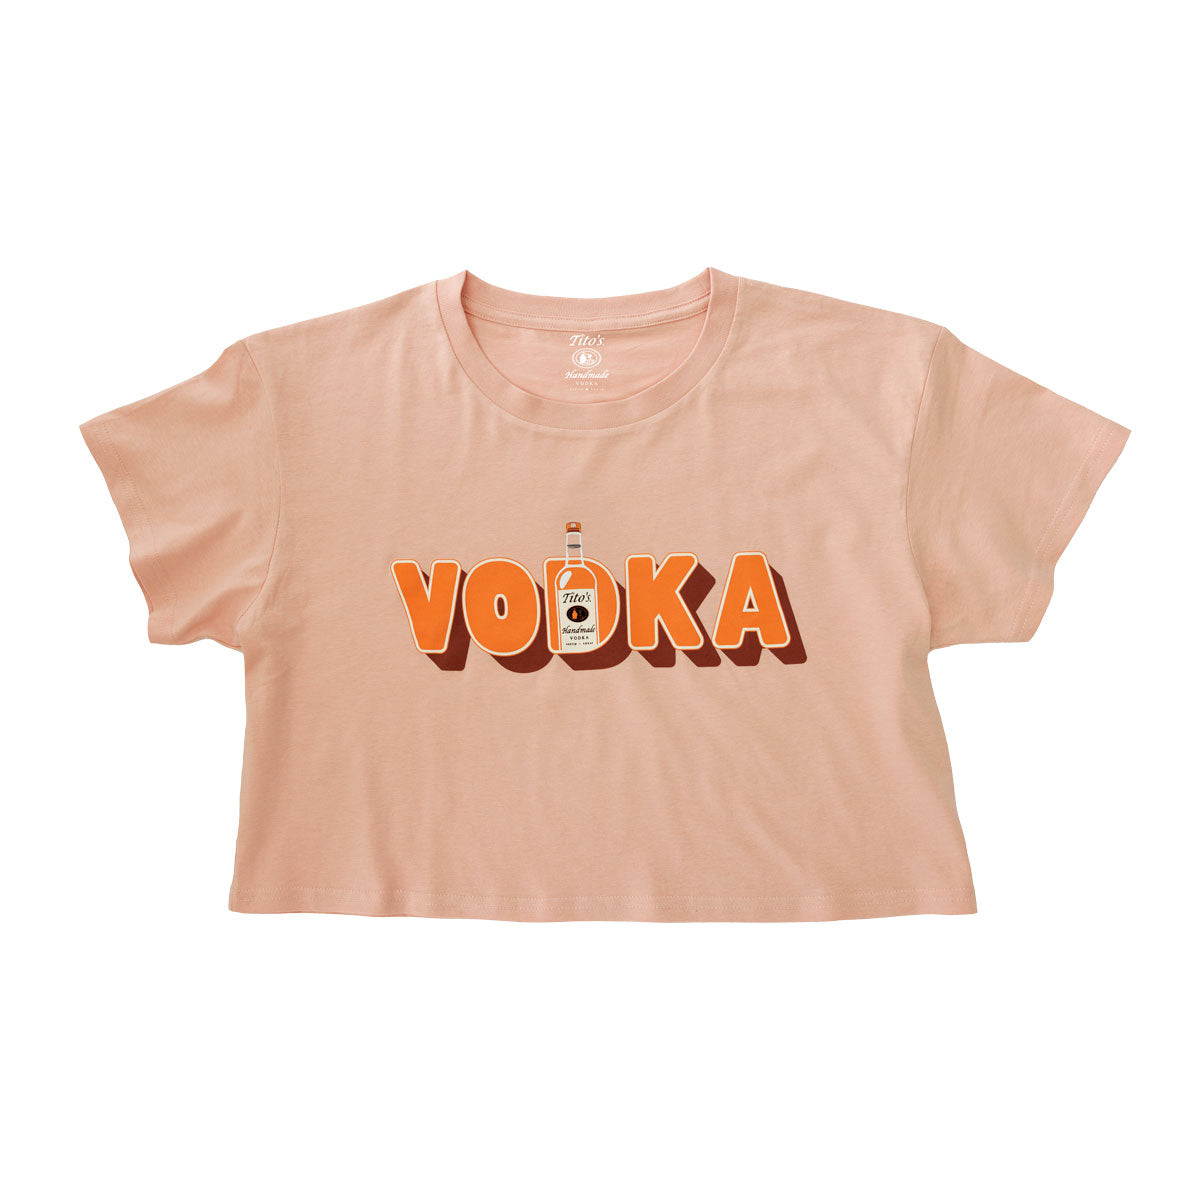 Pale pink crop top with Vodka in orange text and Tito's Handmade Vodka bottle in the letter D